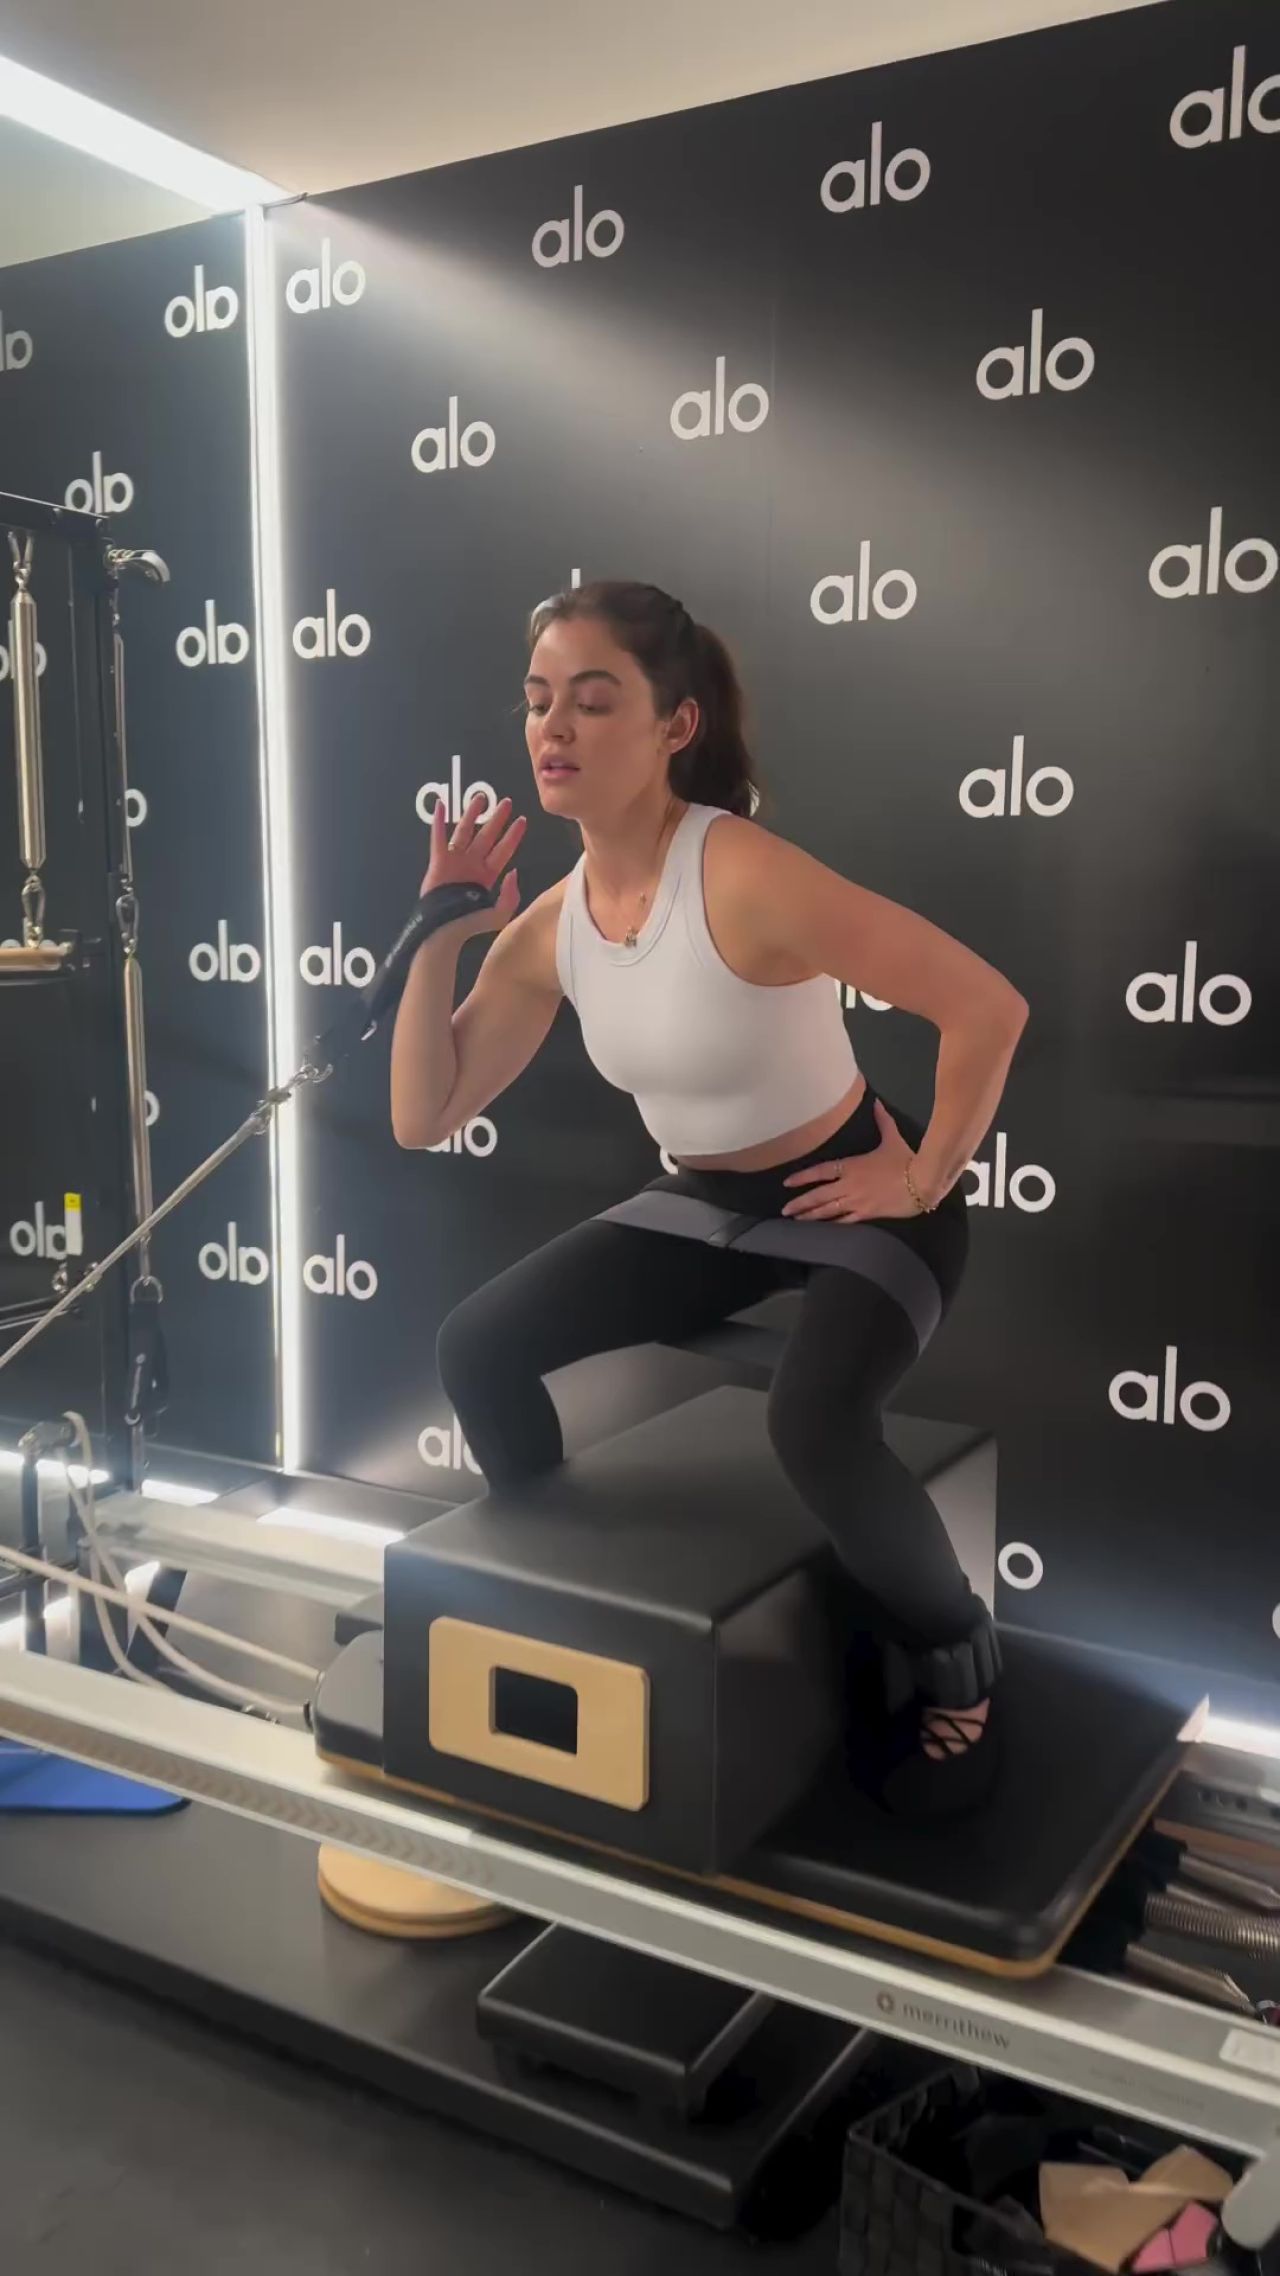 AMERICAN ACTRESS LUCY HALE WORKING OUT GYM STILLS01